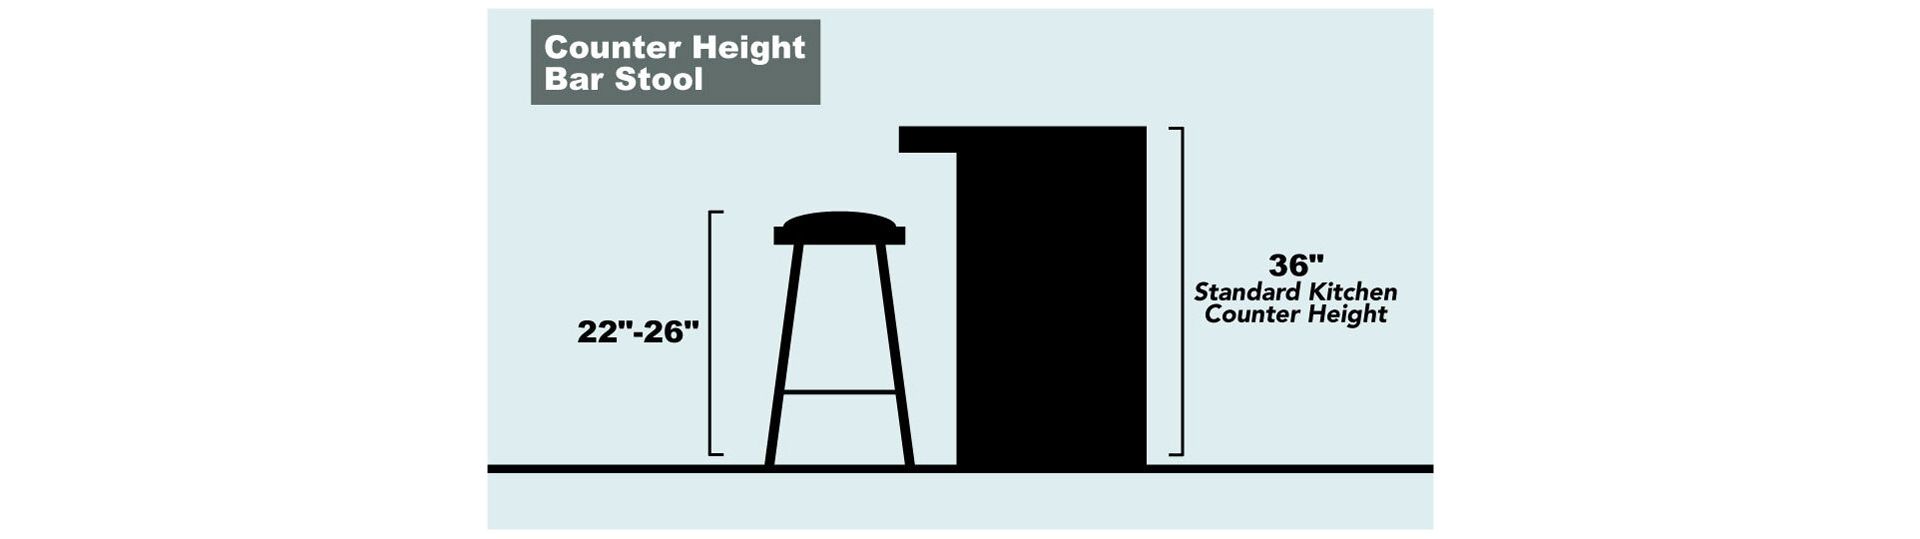 Counter Height Bar Stool. 22-26 inches. Fits under 36inch standard kitchen Counter.